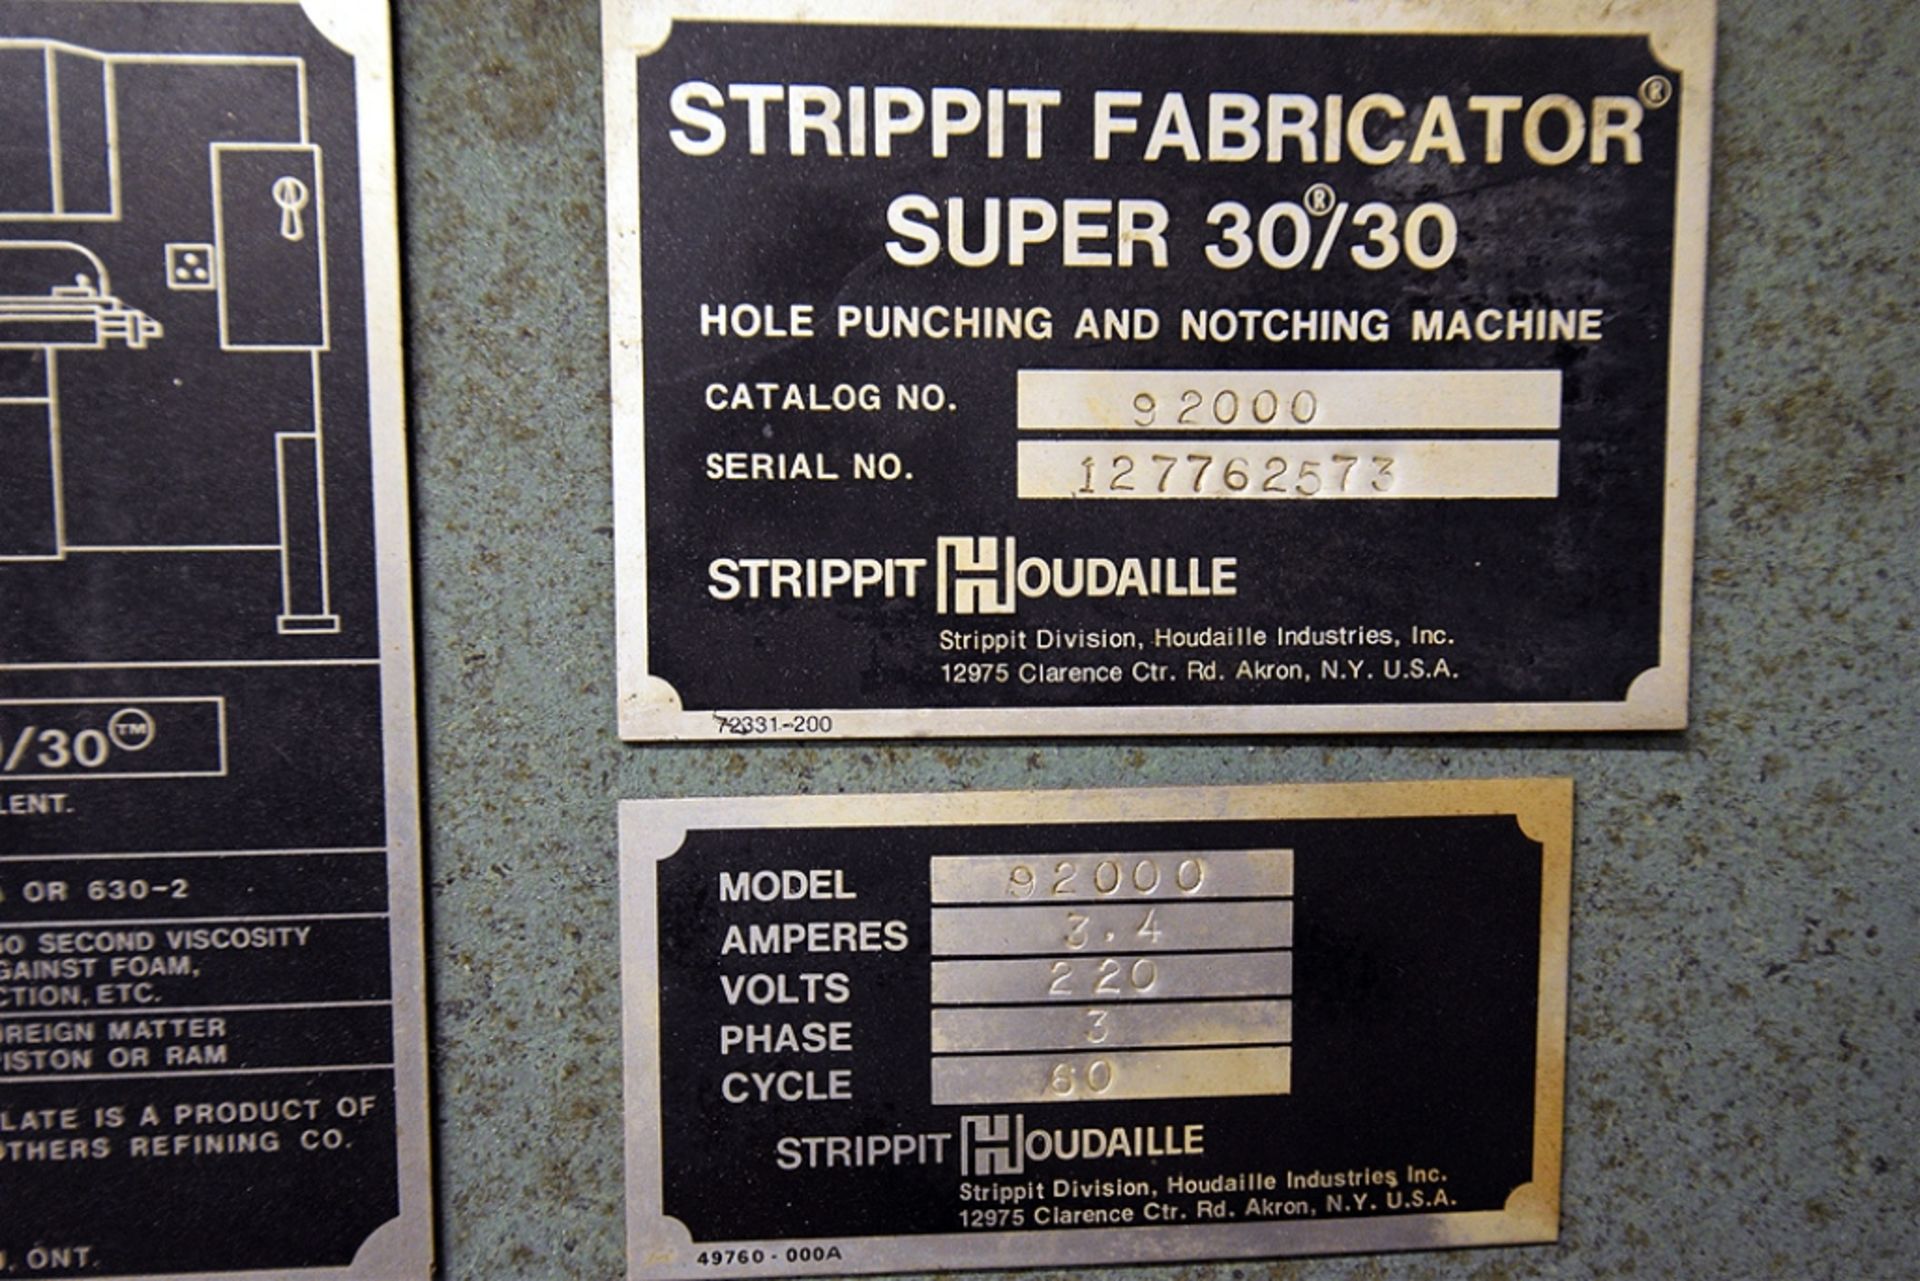 Strippit Fabricator Model: 92000, 30/30 w/ A Large Assortment of Punch Dies - Image 3 of 5